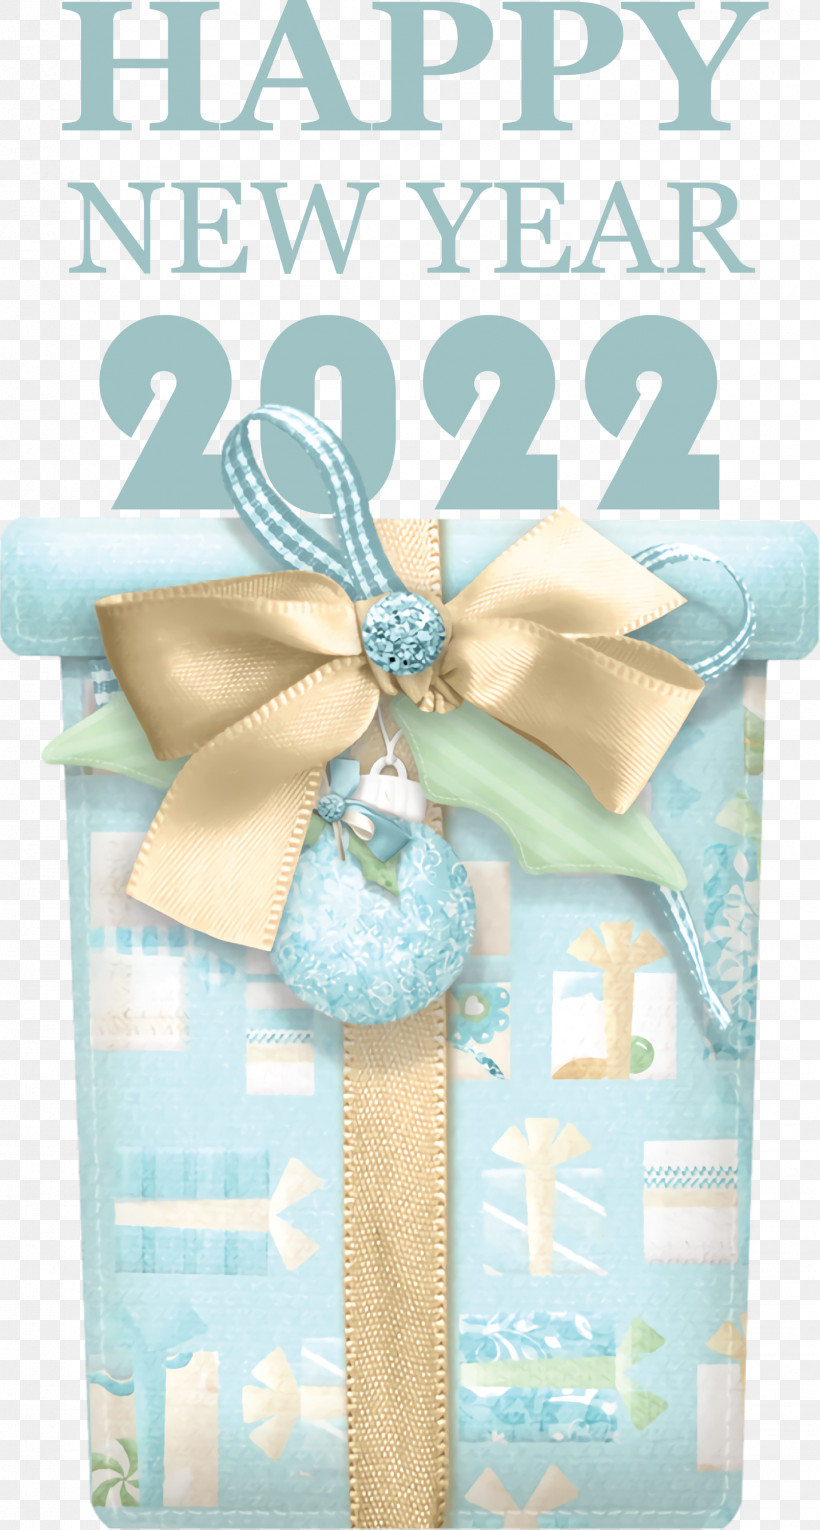 Happy New Year 2022 Gift Boxes Wishes, PNG, 1607x3000px, Gift Boxes, Blue, Meter, Online Chat, Ribbon Download Free